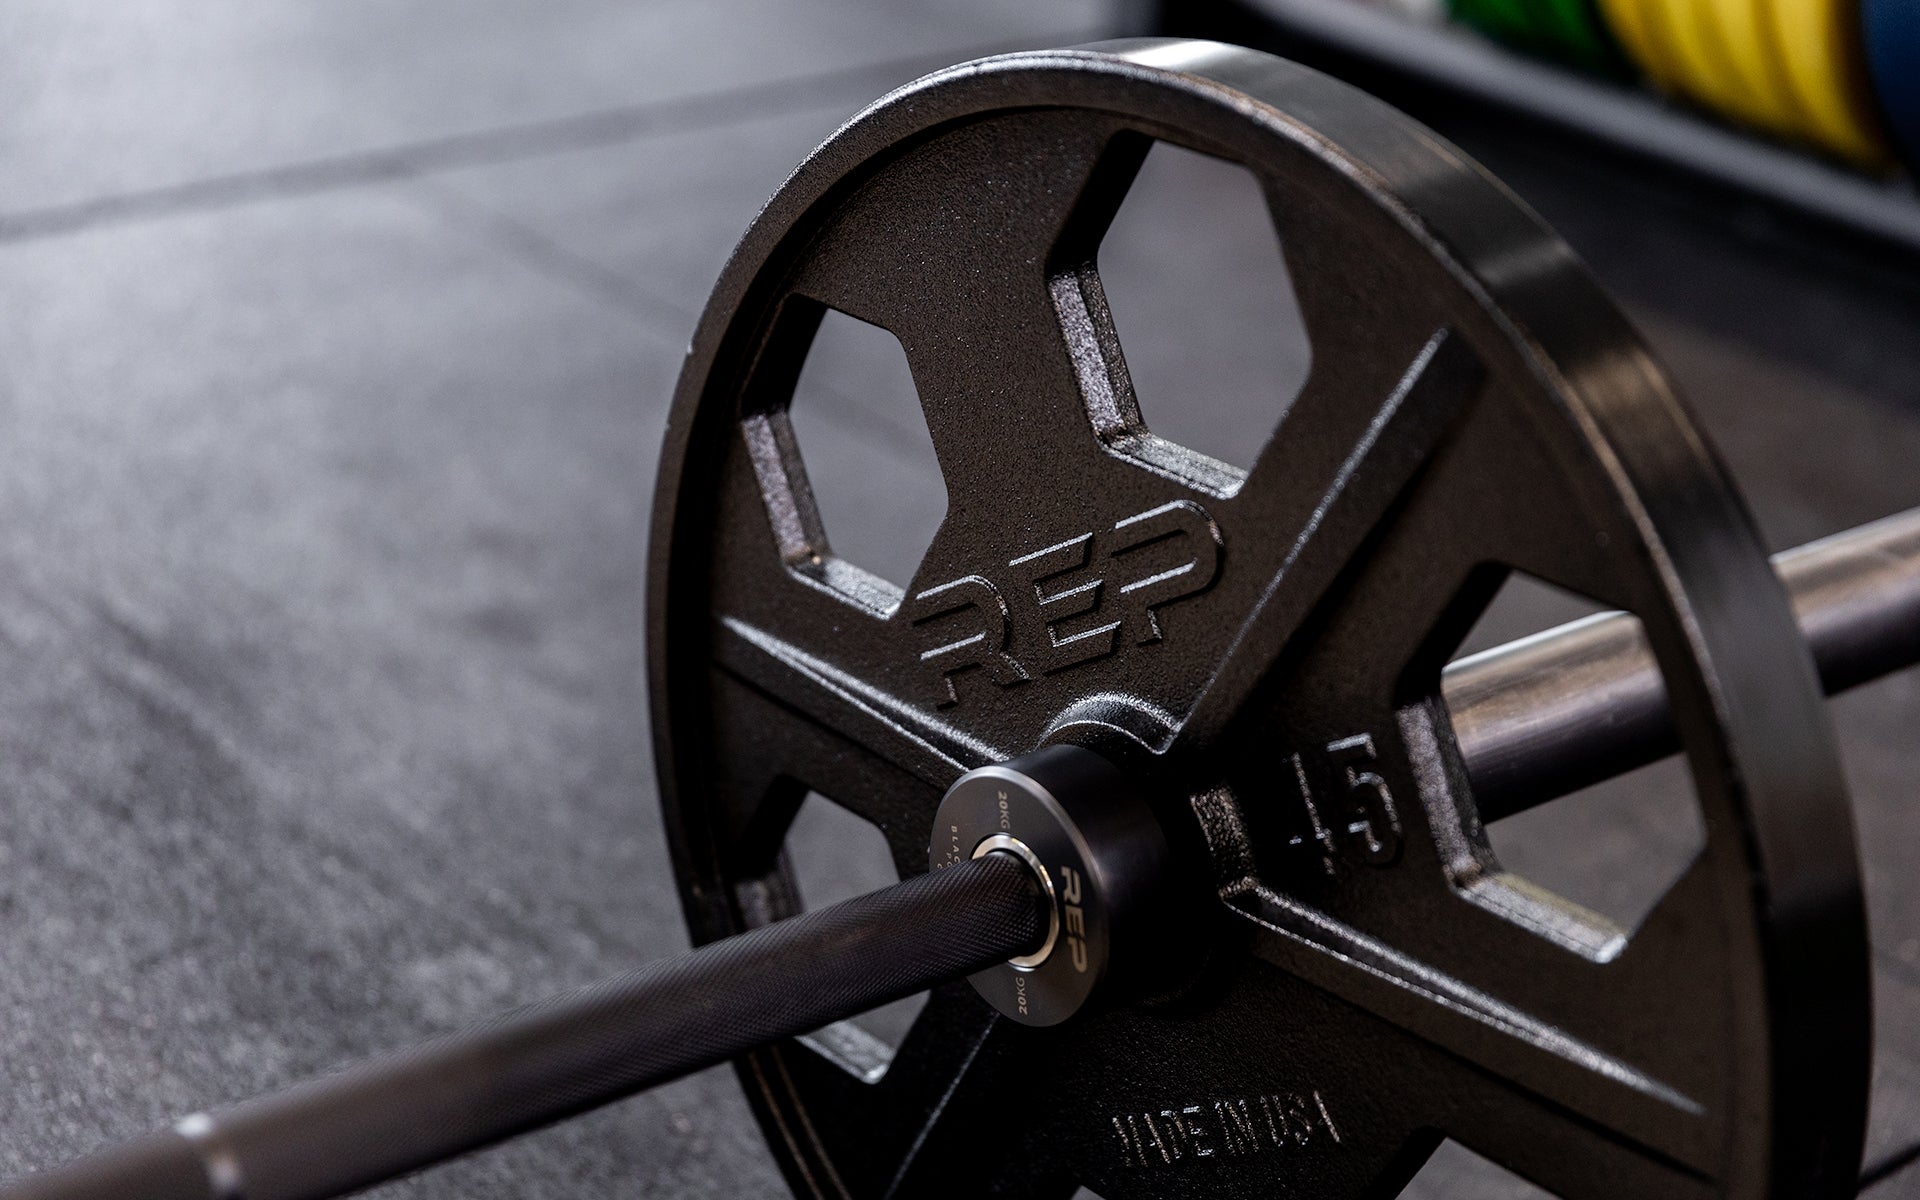 Close-up view of a 45lb USA-Made Equalizer Iron Plate loaded on a barbell.